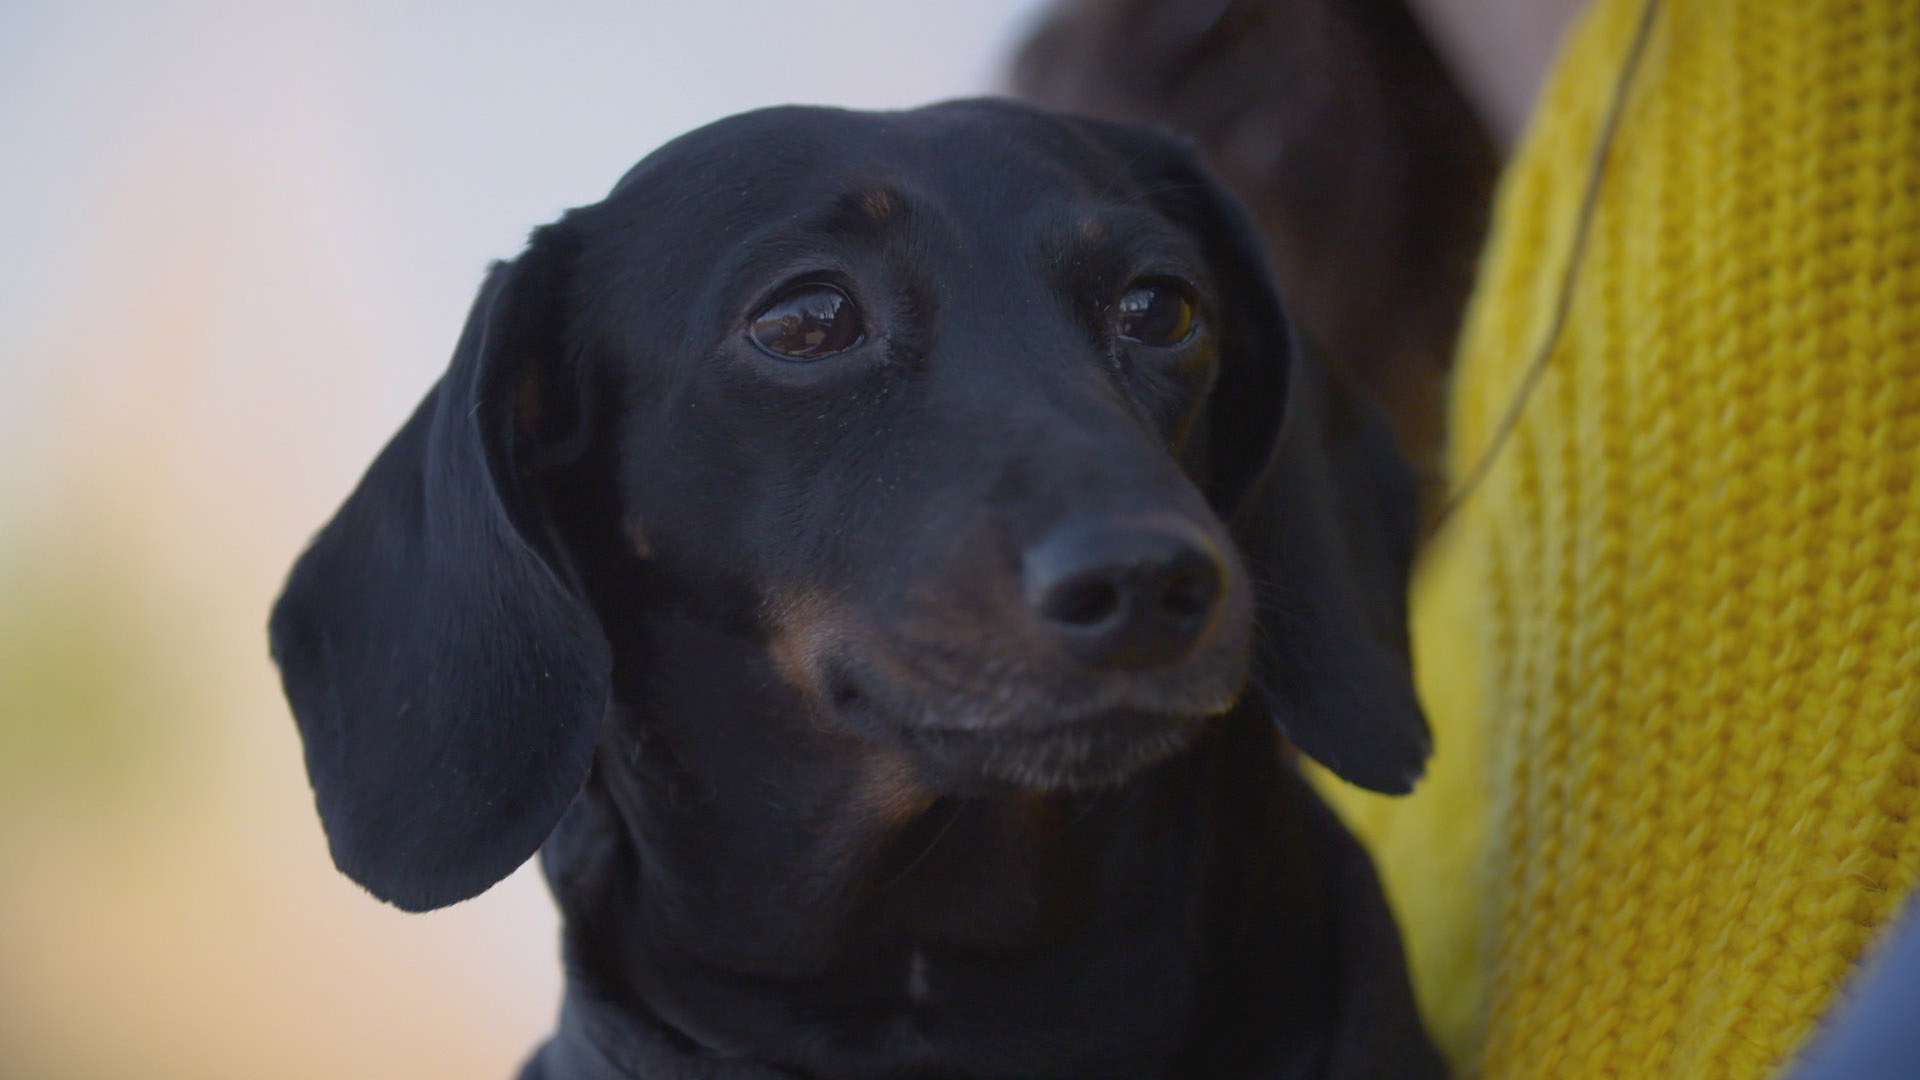 5 year old Dachshund patient on The Supervet